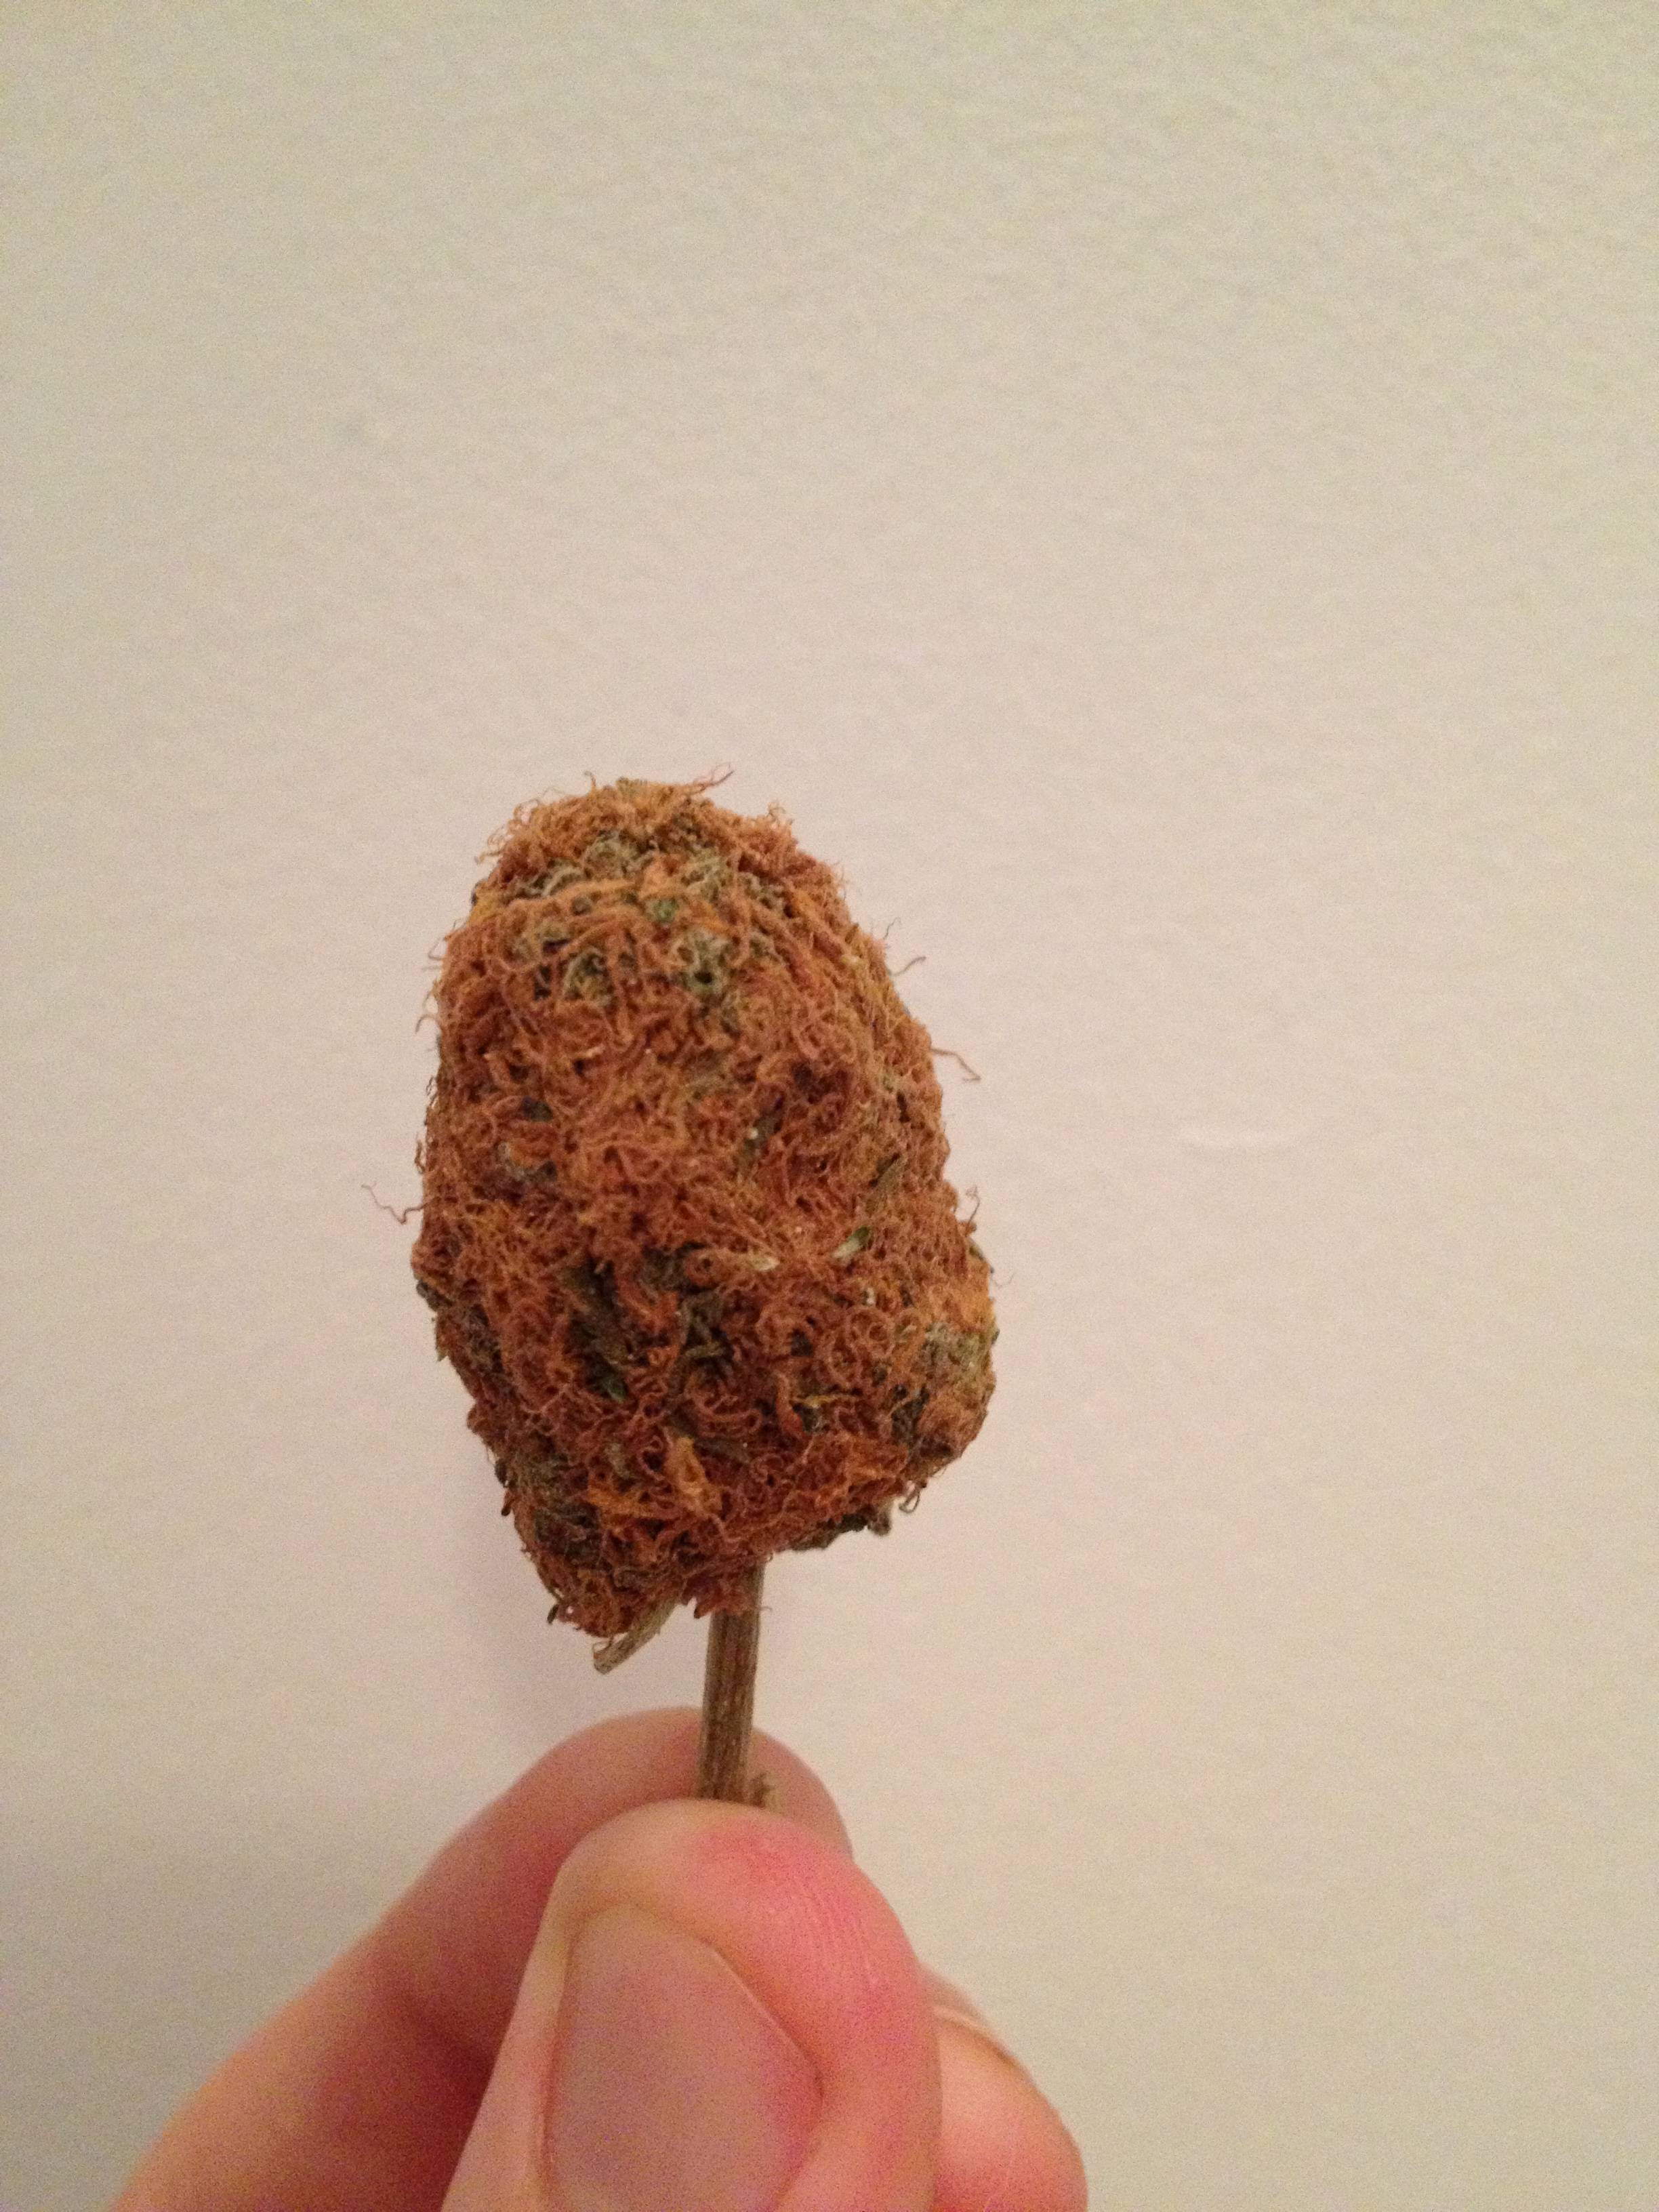 I just picked up a half oz, and the buds are HAIRY AS FUCK. Is this ...